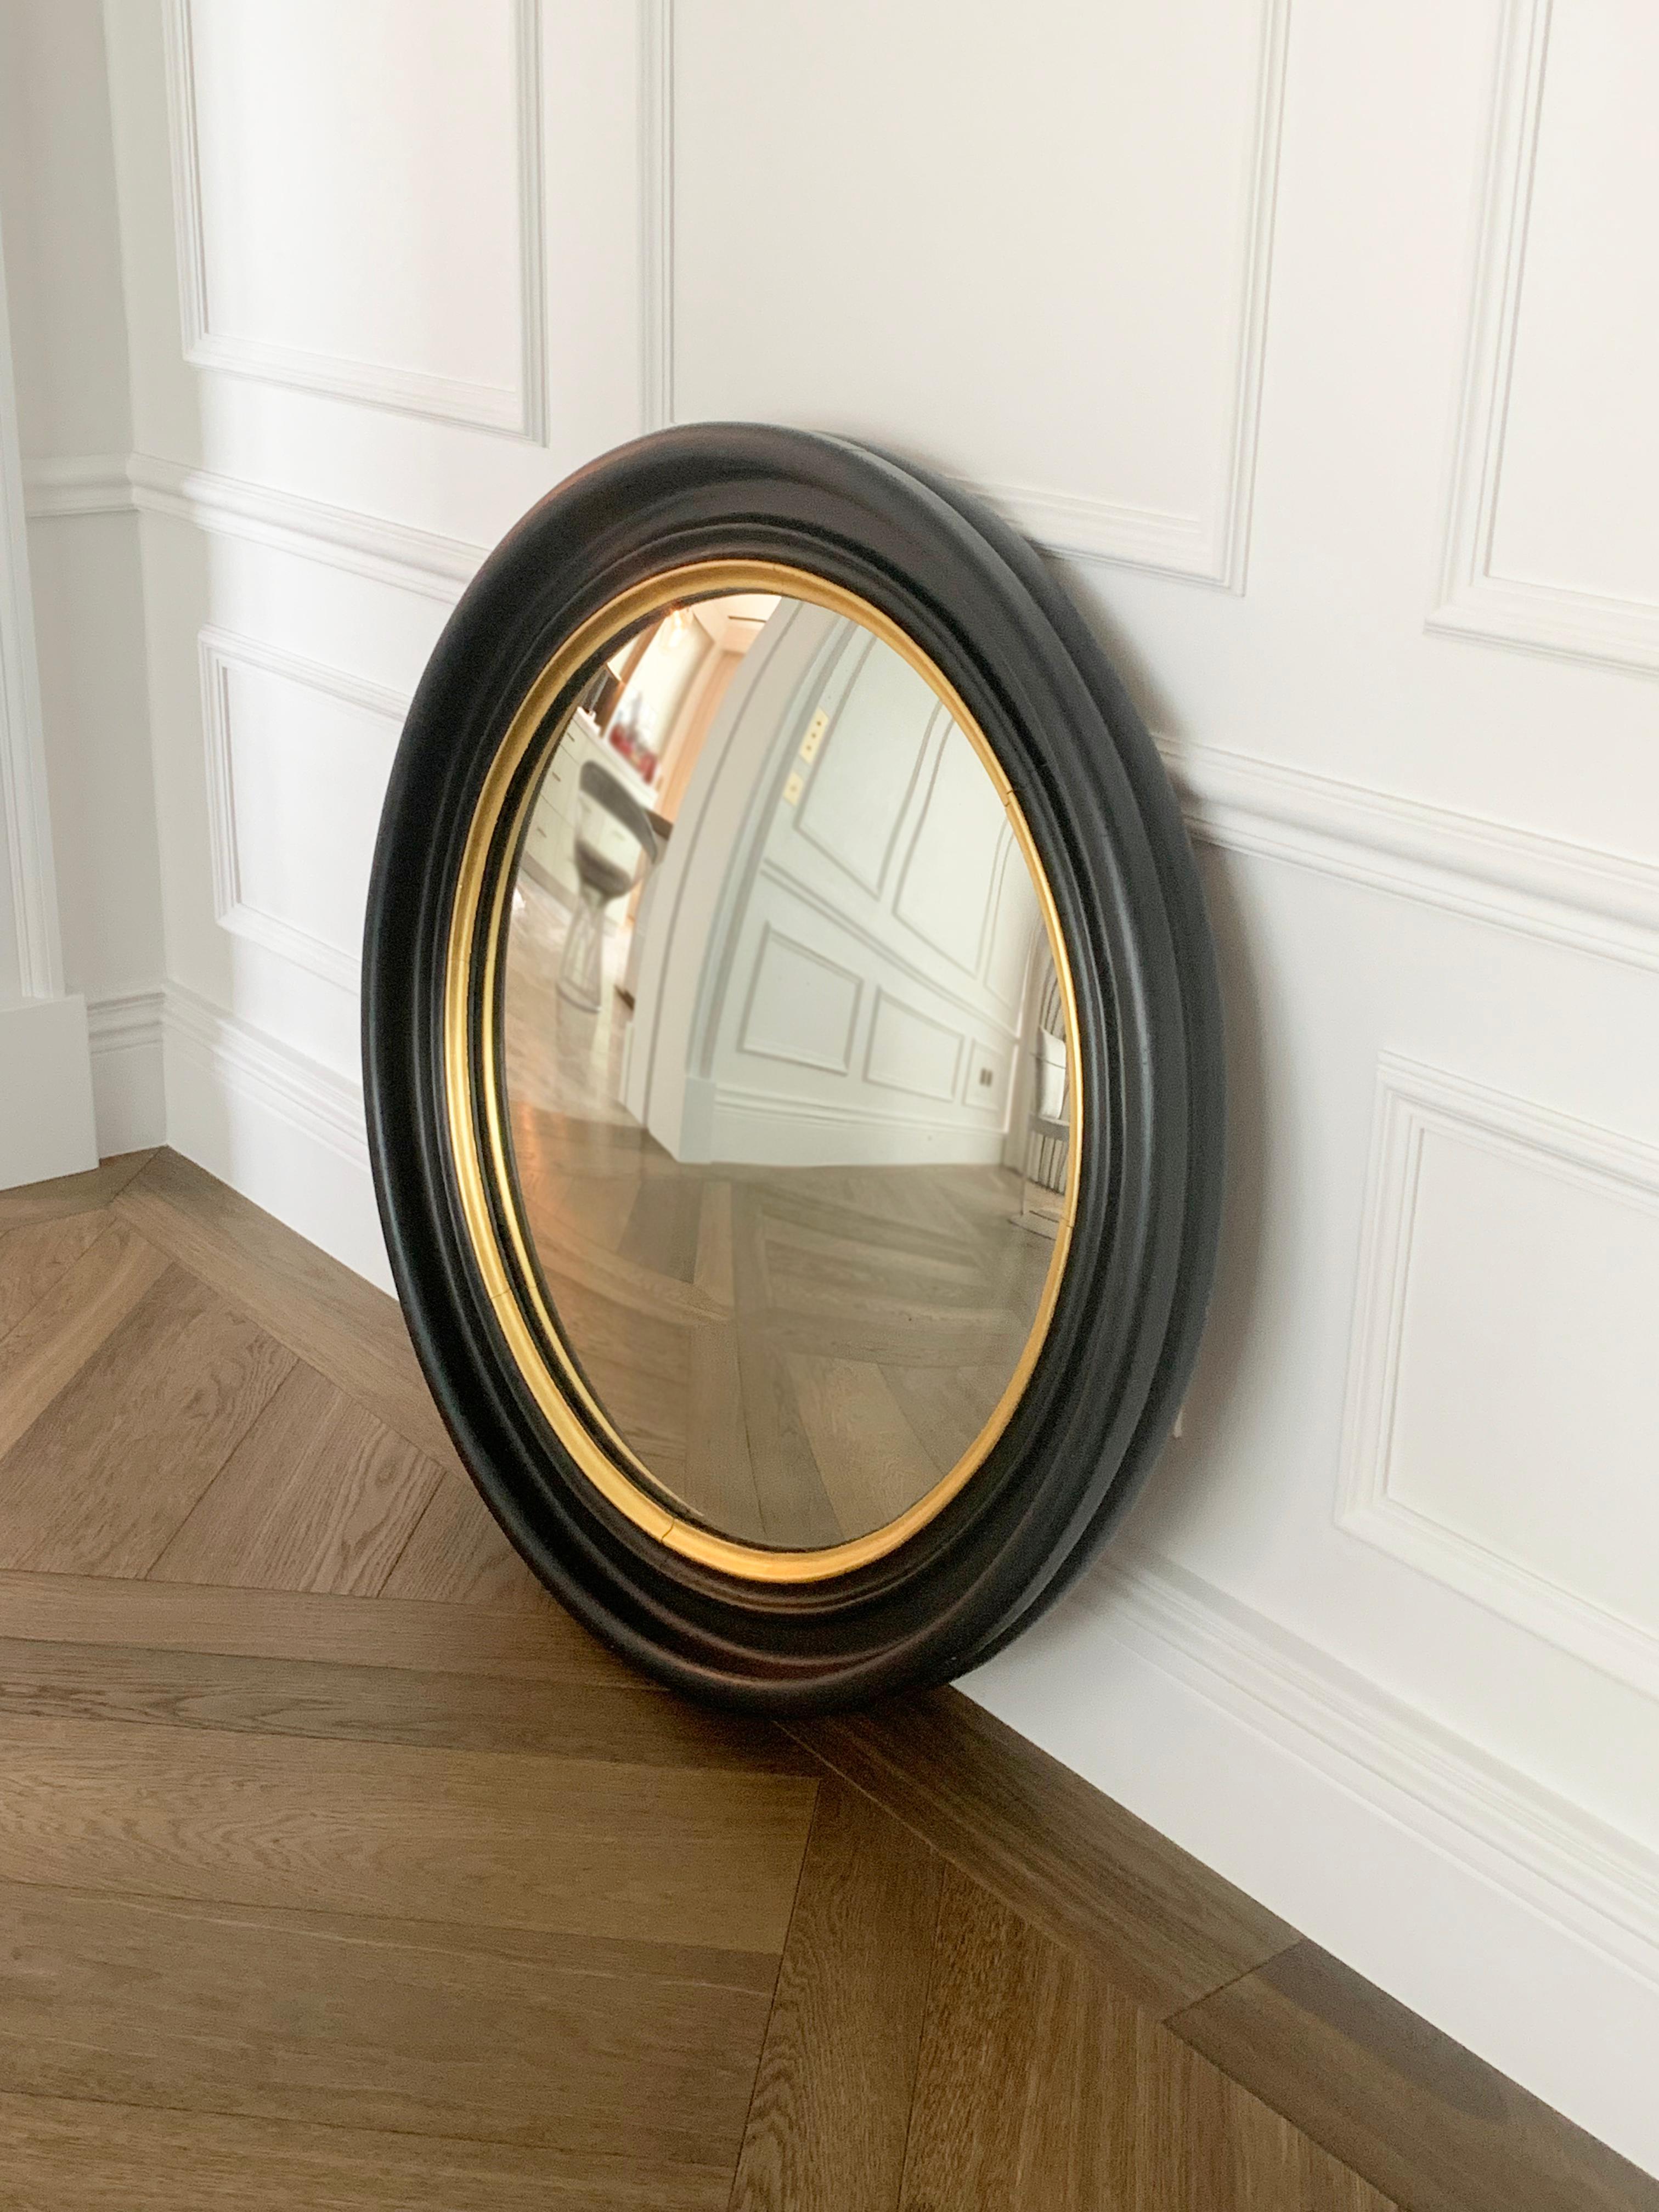 A pair of handmade Regency era wooden convex, bullseye mirrors 

Introducing a stunning pair of Regency-era convex ship mirrors, expertly hand-carved and crafted with a thick black and gilt wood frame. 

The convex/bullseye mirrors exude timeless